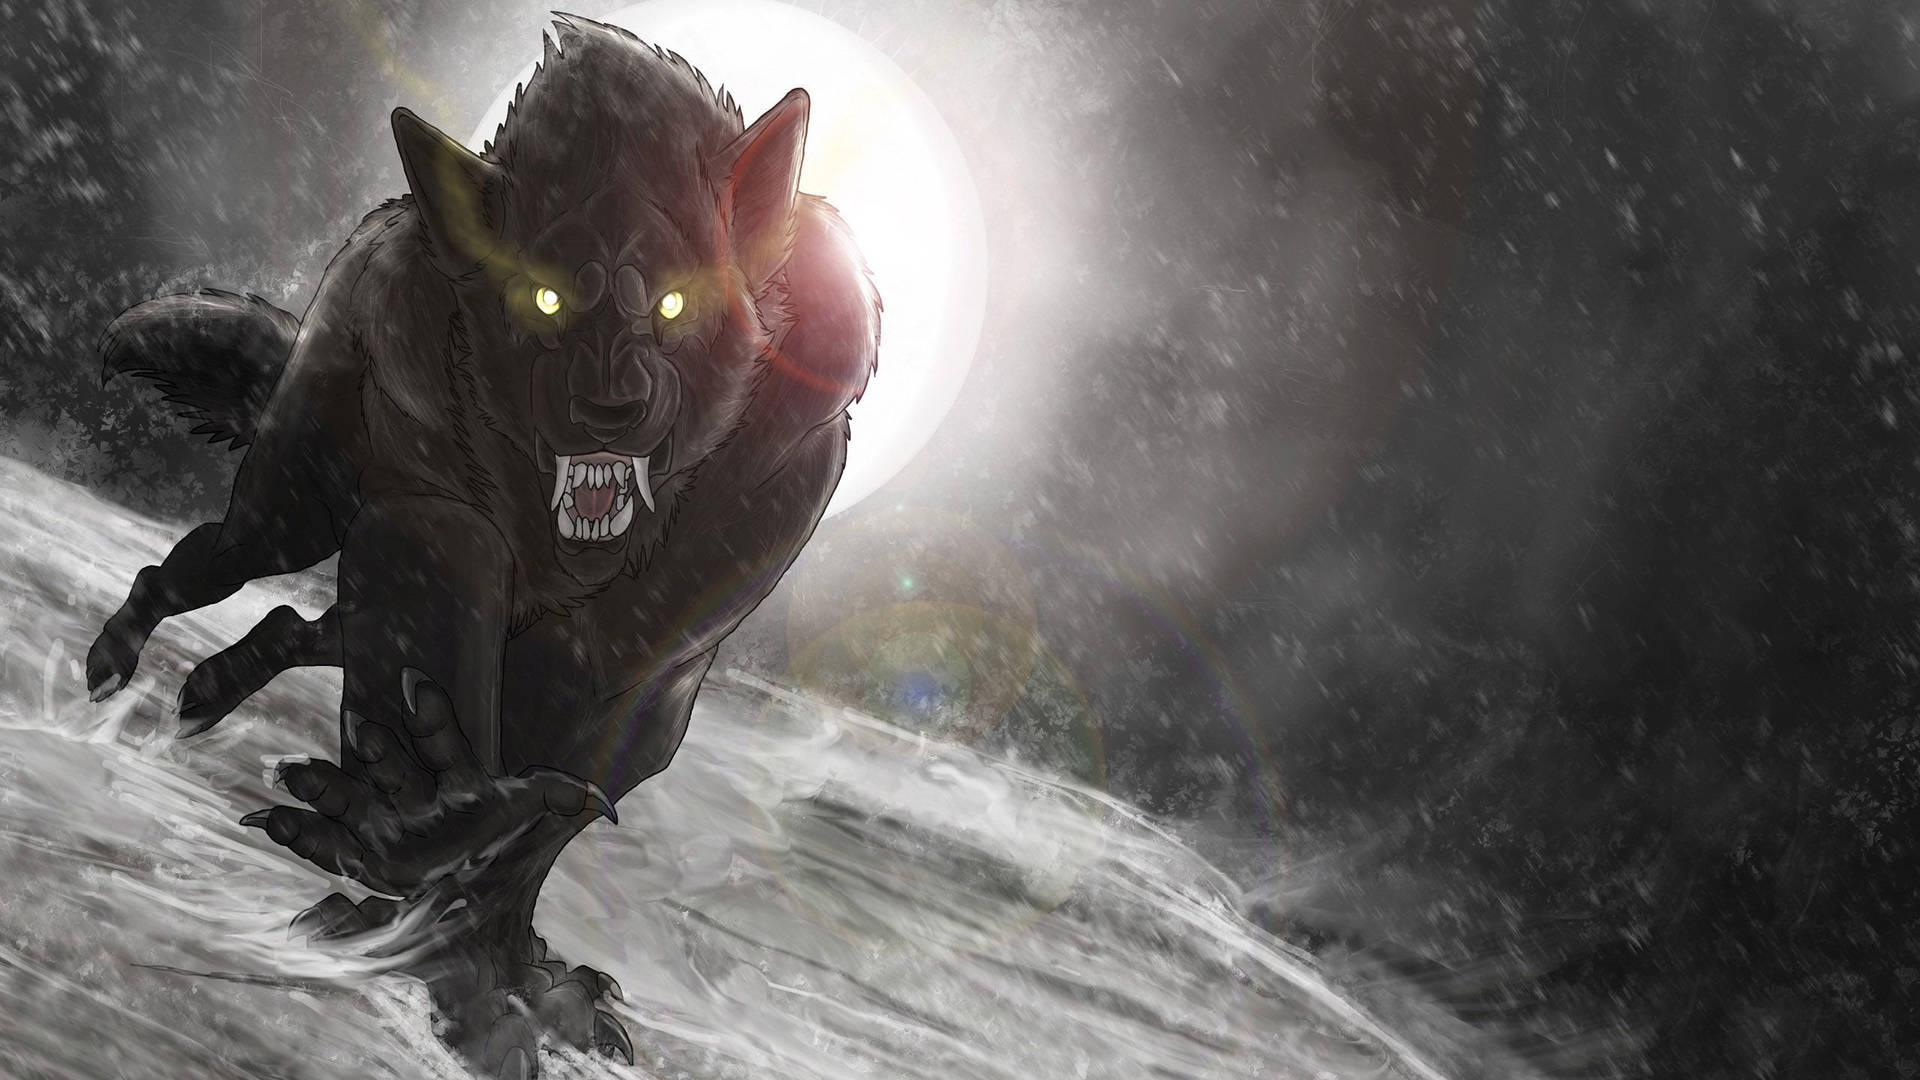 An intense and menacing werewolf ready to attack Wallpaper